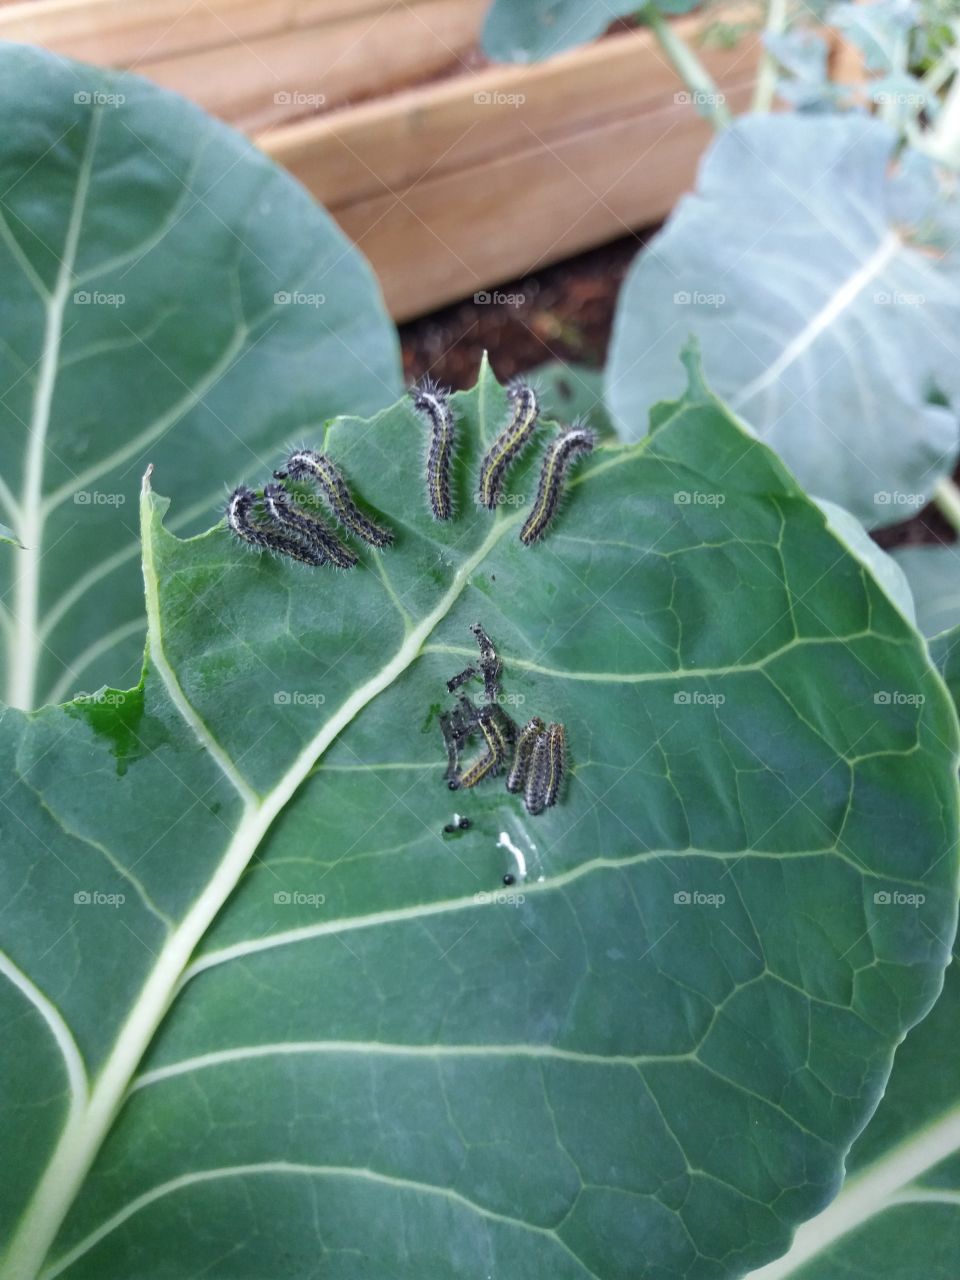 Caterpillers rating the leaves of Brussels sprouts